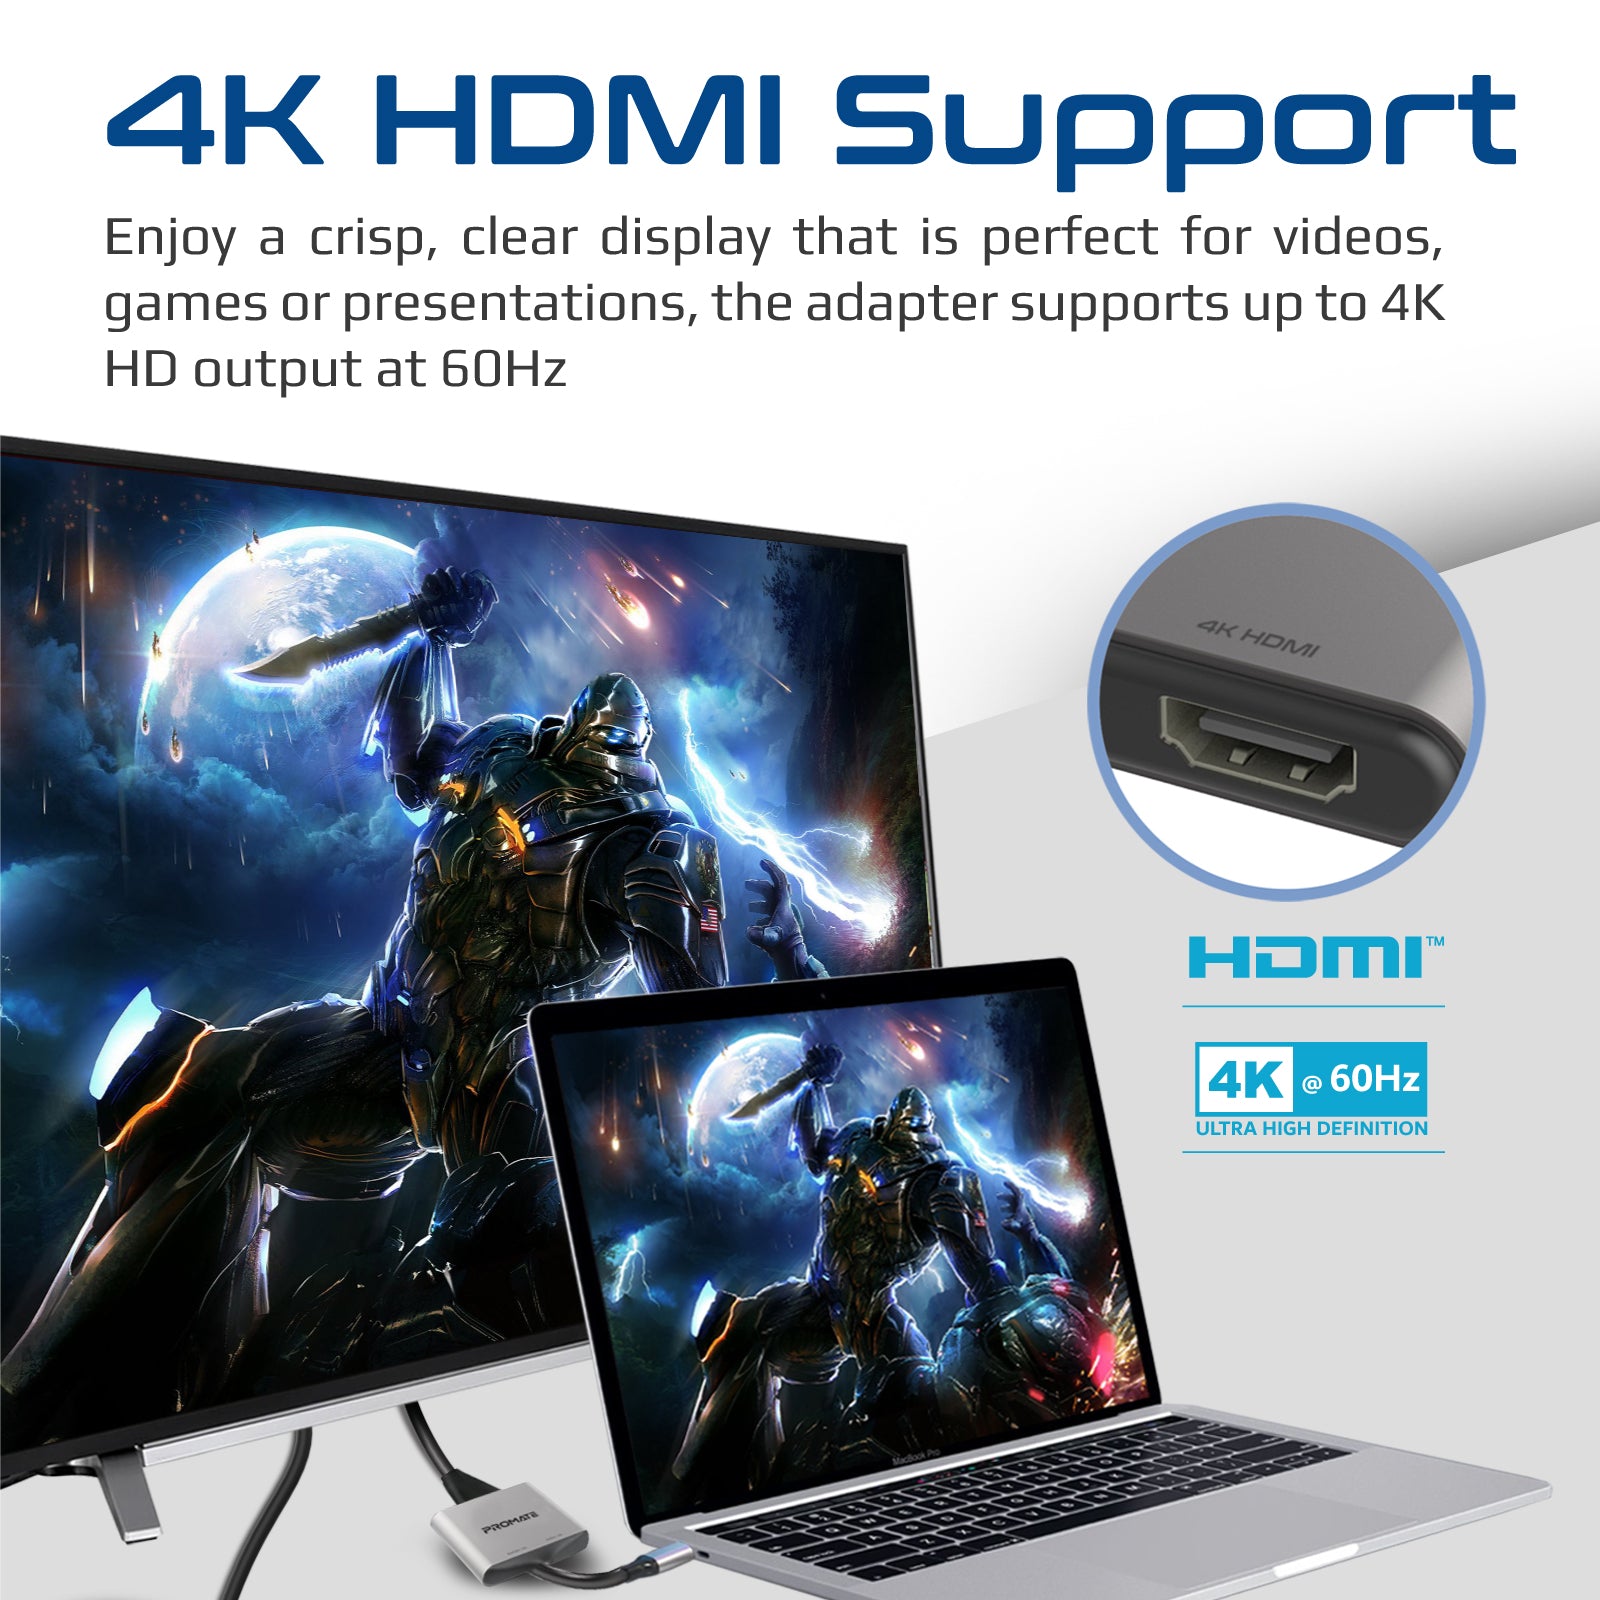 Promate USB-C to HDMI Adapter, Ultra HD 4k 60hz Type-C to HDMI Adapter Converter with Dual HDMI Ports, Compact Travel-Friendly Design for MacBook Pro, iPad Air, Samsung Galaxy S22, MediaLink-H2